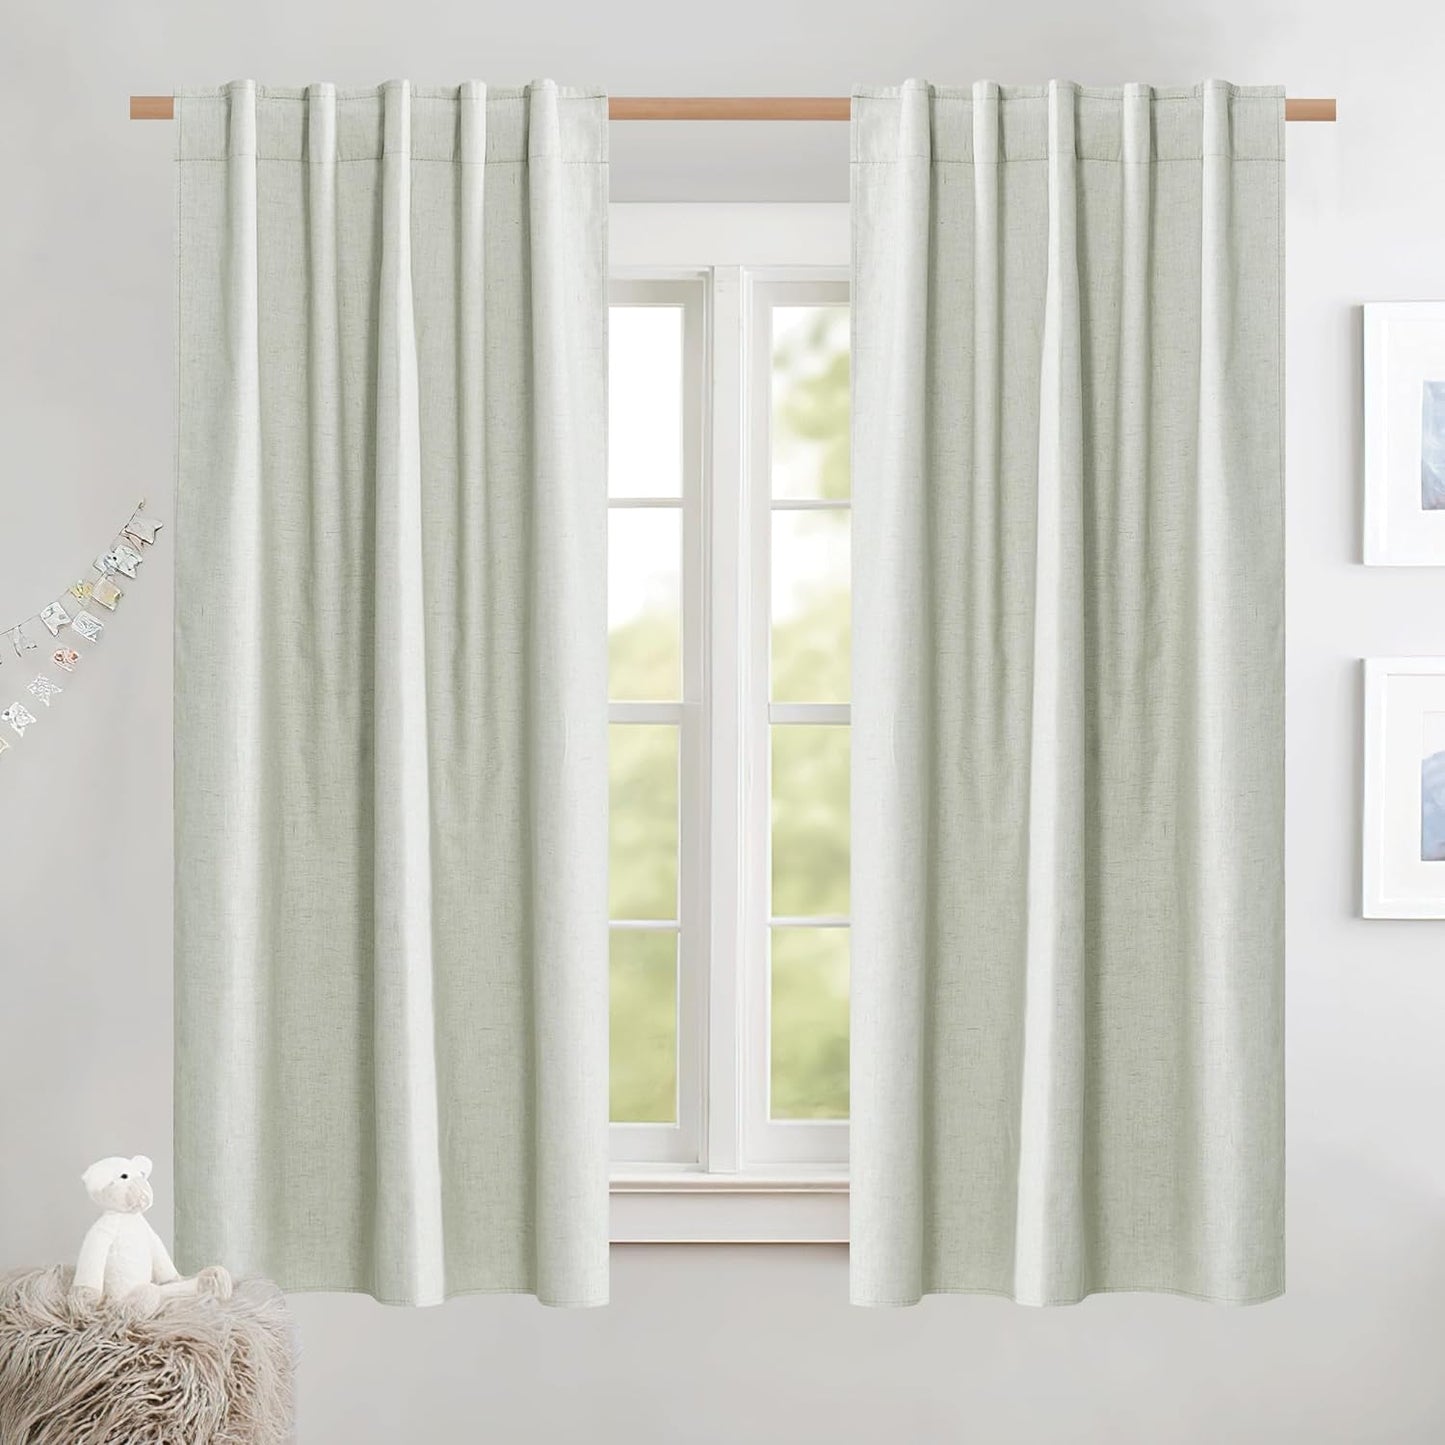 NICETOWN 100% Blackout Linen Curtains for Living Room with Thermal Insulated White Liner, Ivory, 52" Wide, 2 Panels, 84" Long Drapes, Back Tab Retro Linen Curtains Vertical Drapes Privacy for Bedroom  NICETOWN Sage Green W42 X L63 